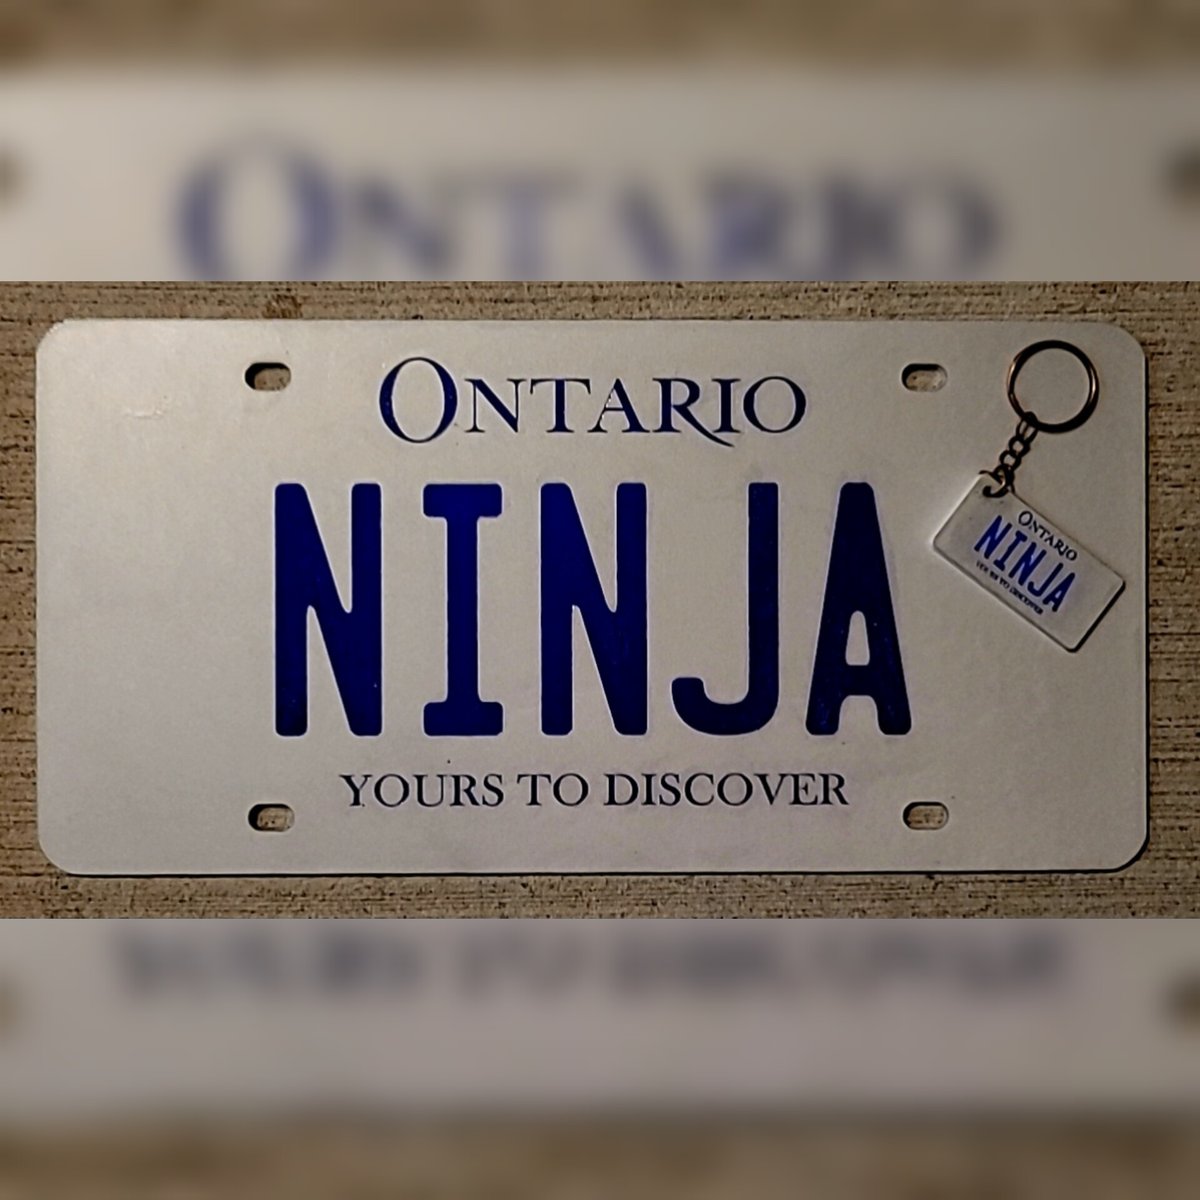 Another Vanity / Car Show plate done by PonyHubDesigns...

Text or email if interested in having any made. 

416-525-9115 
Info@ponyhubdesigns.ca 

#CustomPlates #PonyHubDesigns #OffRoadOnly #CarShows #Ninja